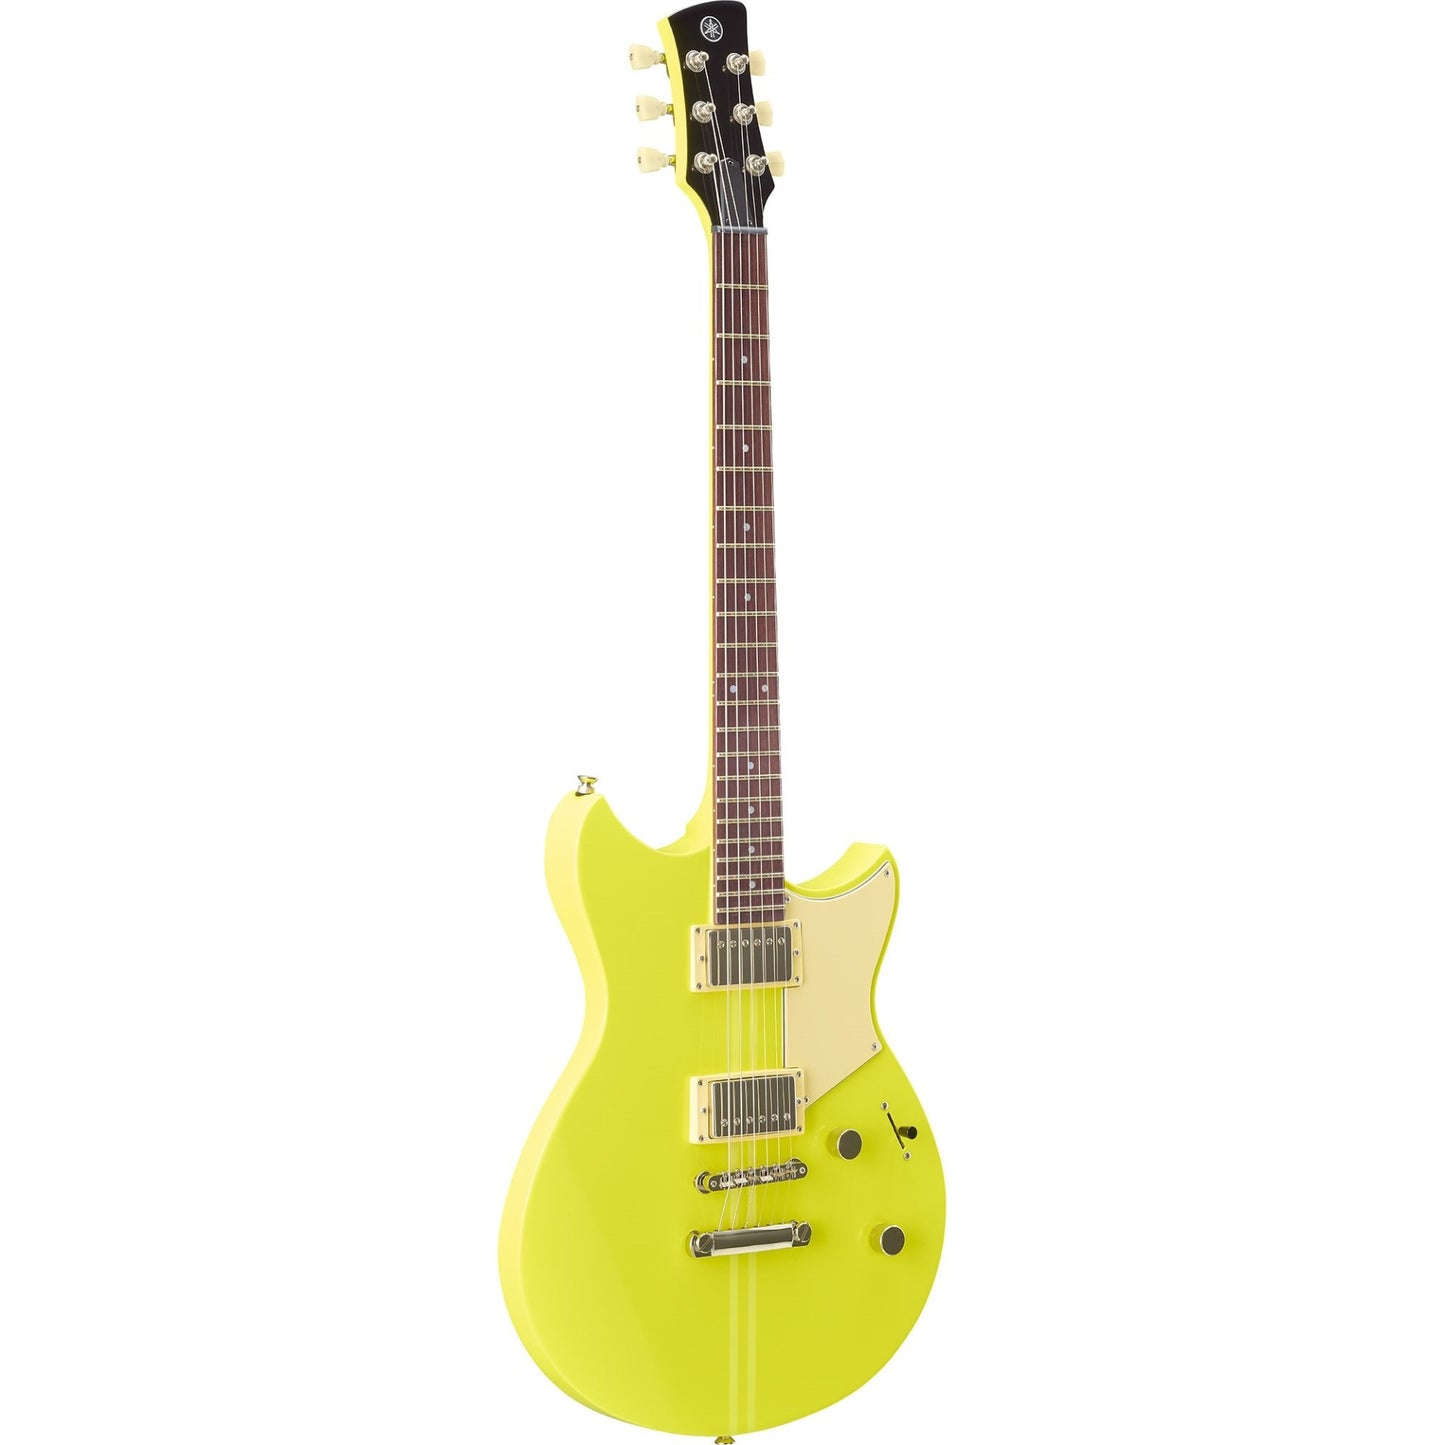 Yamaha Revstar RSE20NYL Electric Guitar in Neon Yellow, Guitar Only